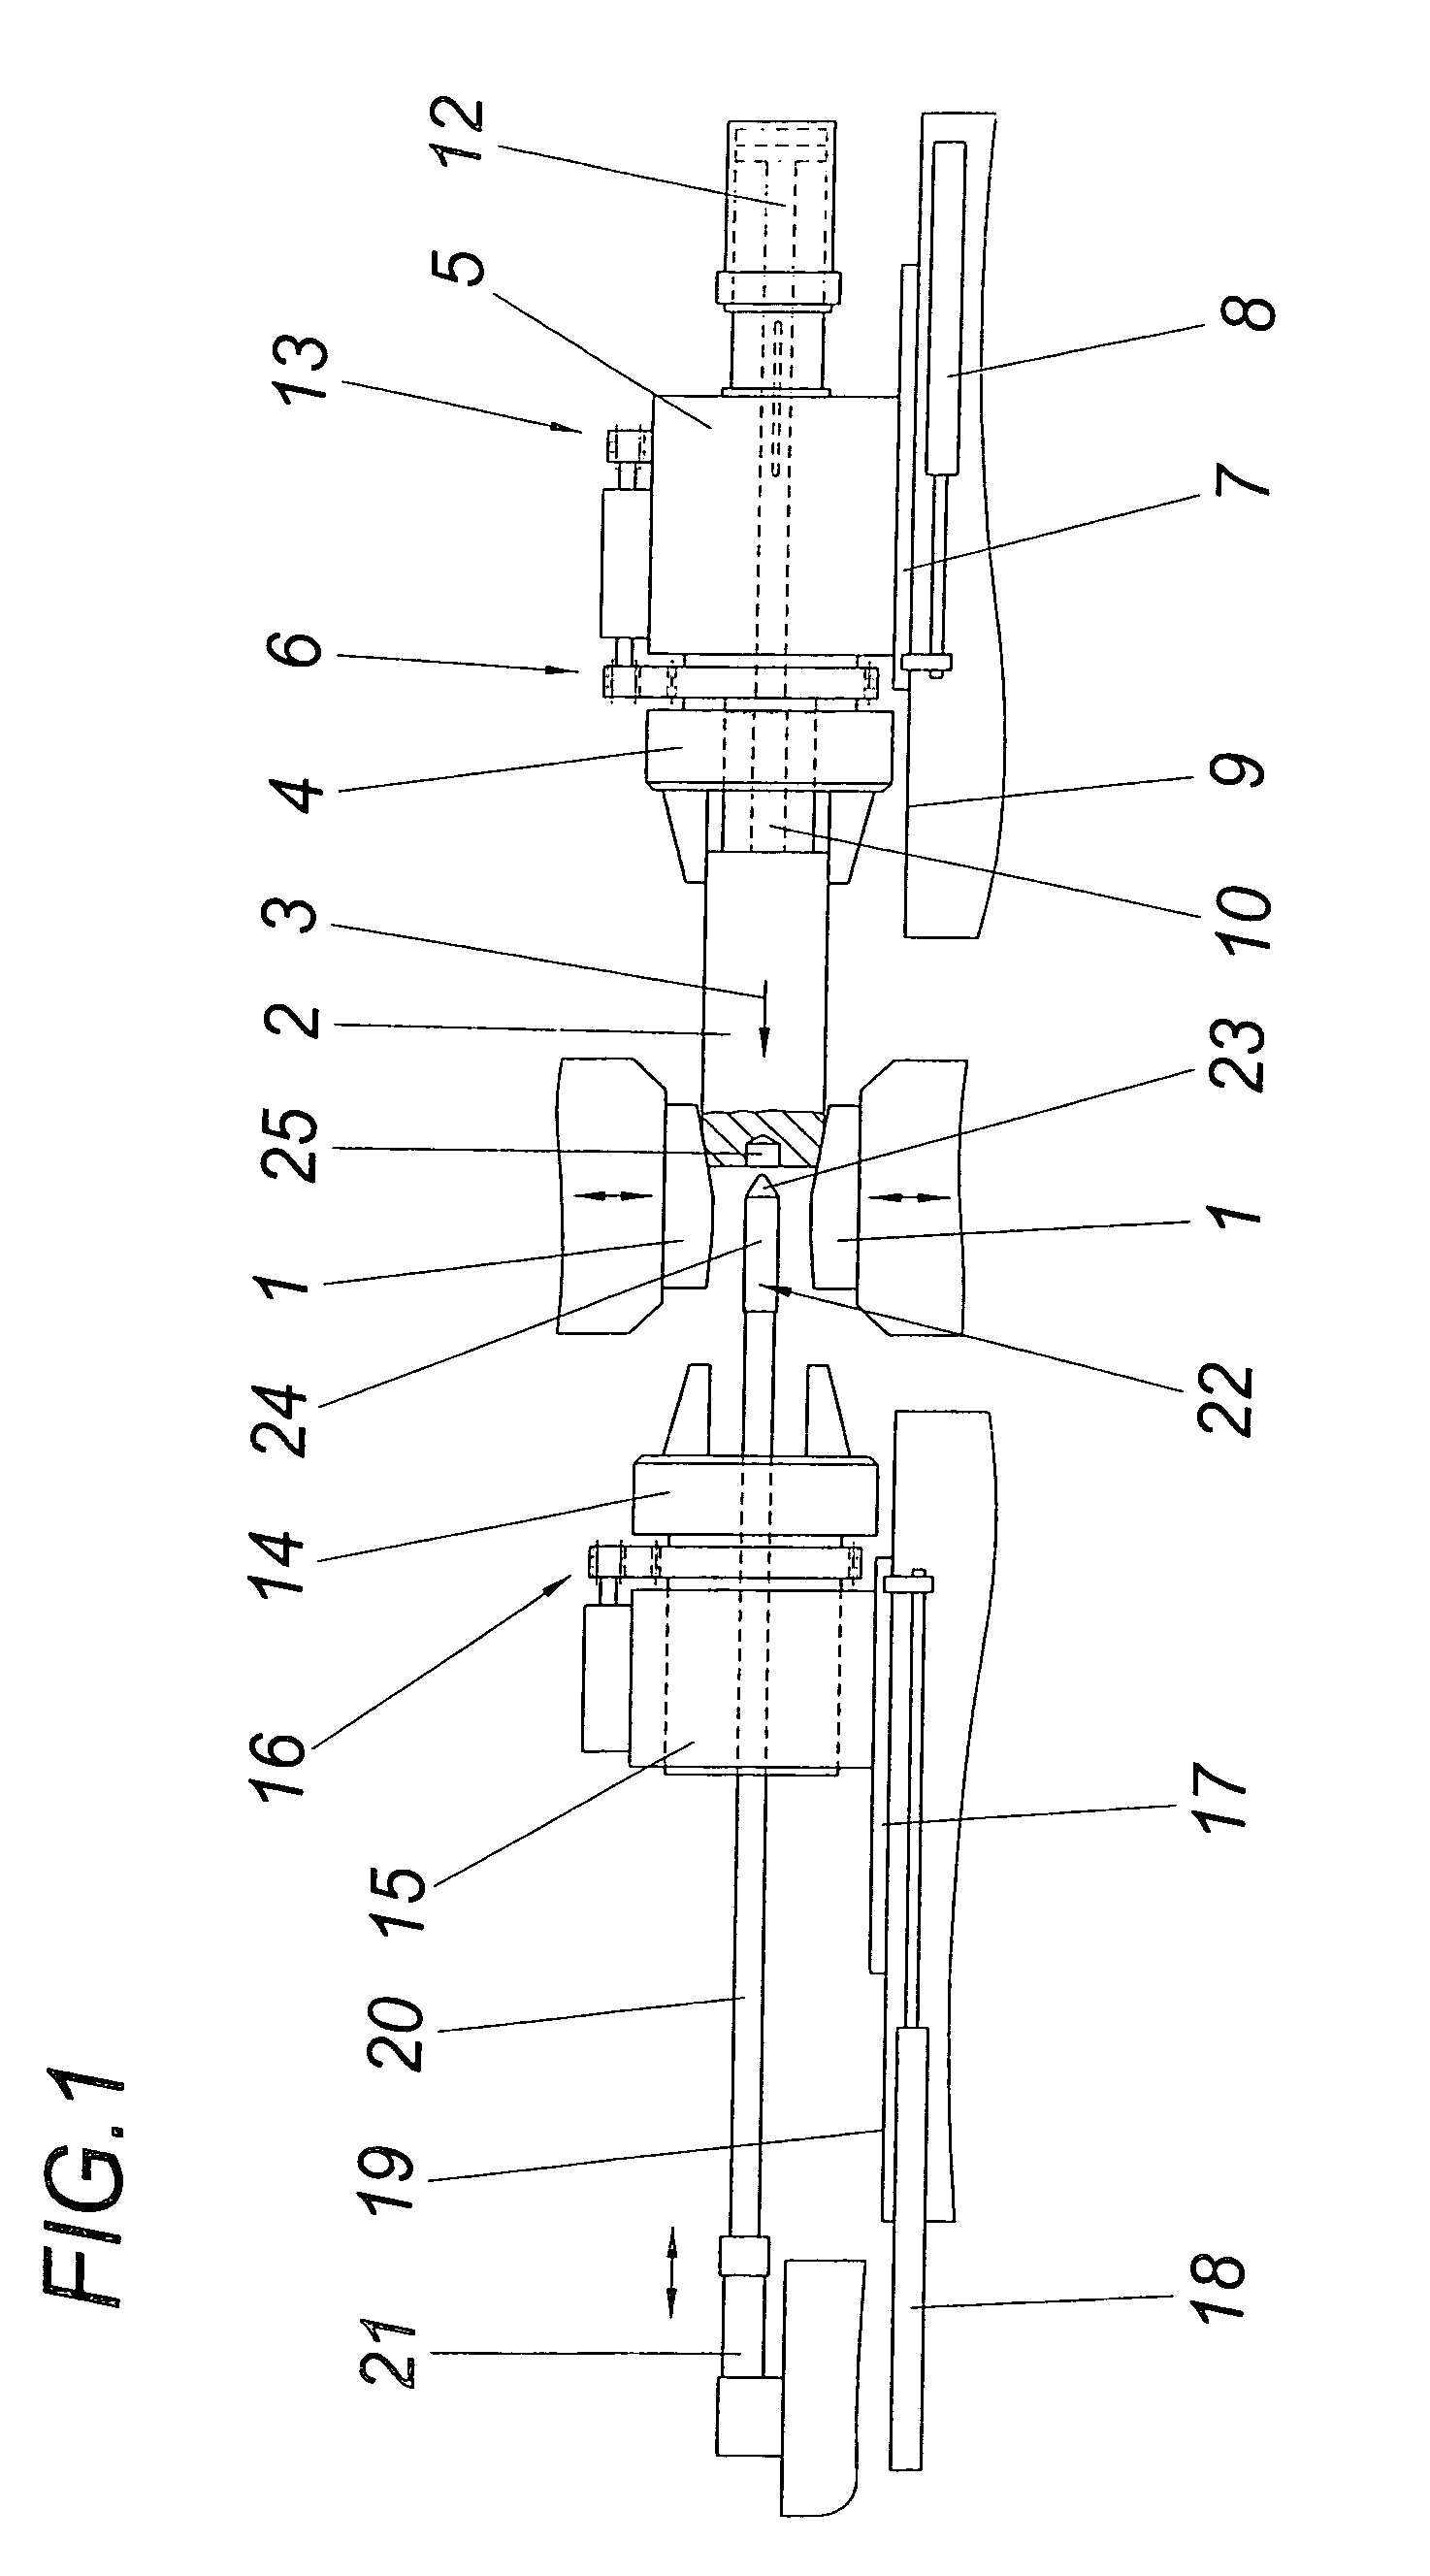 Method and apparatus for producing a cylindriacal hollow body from a blank